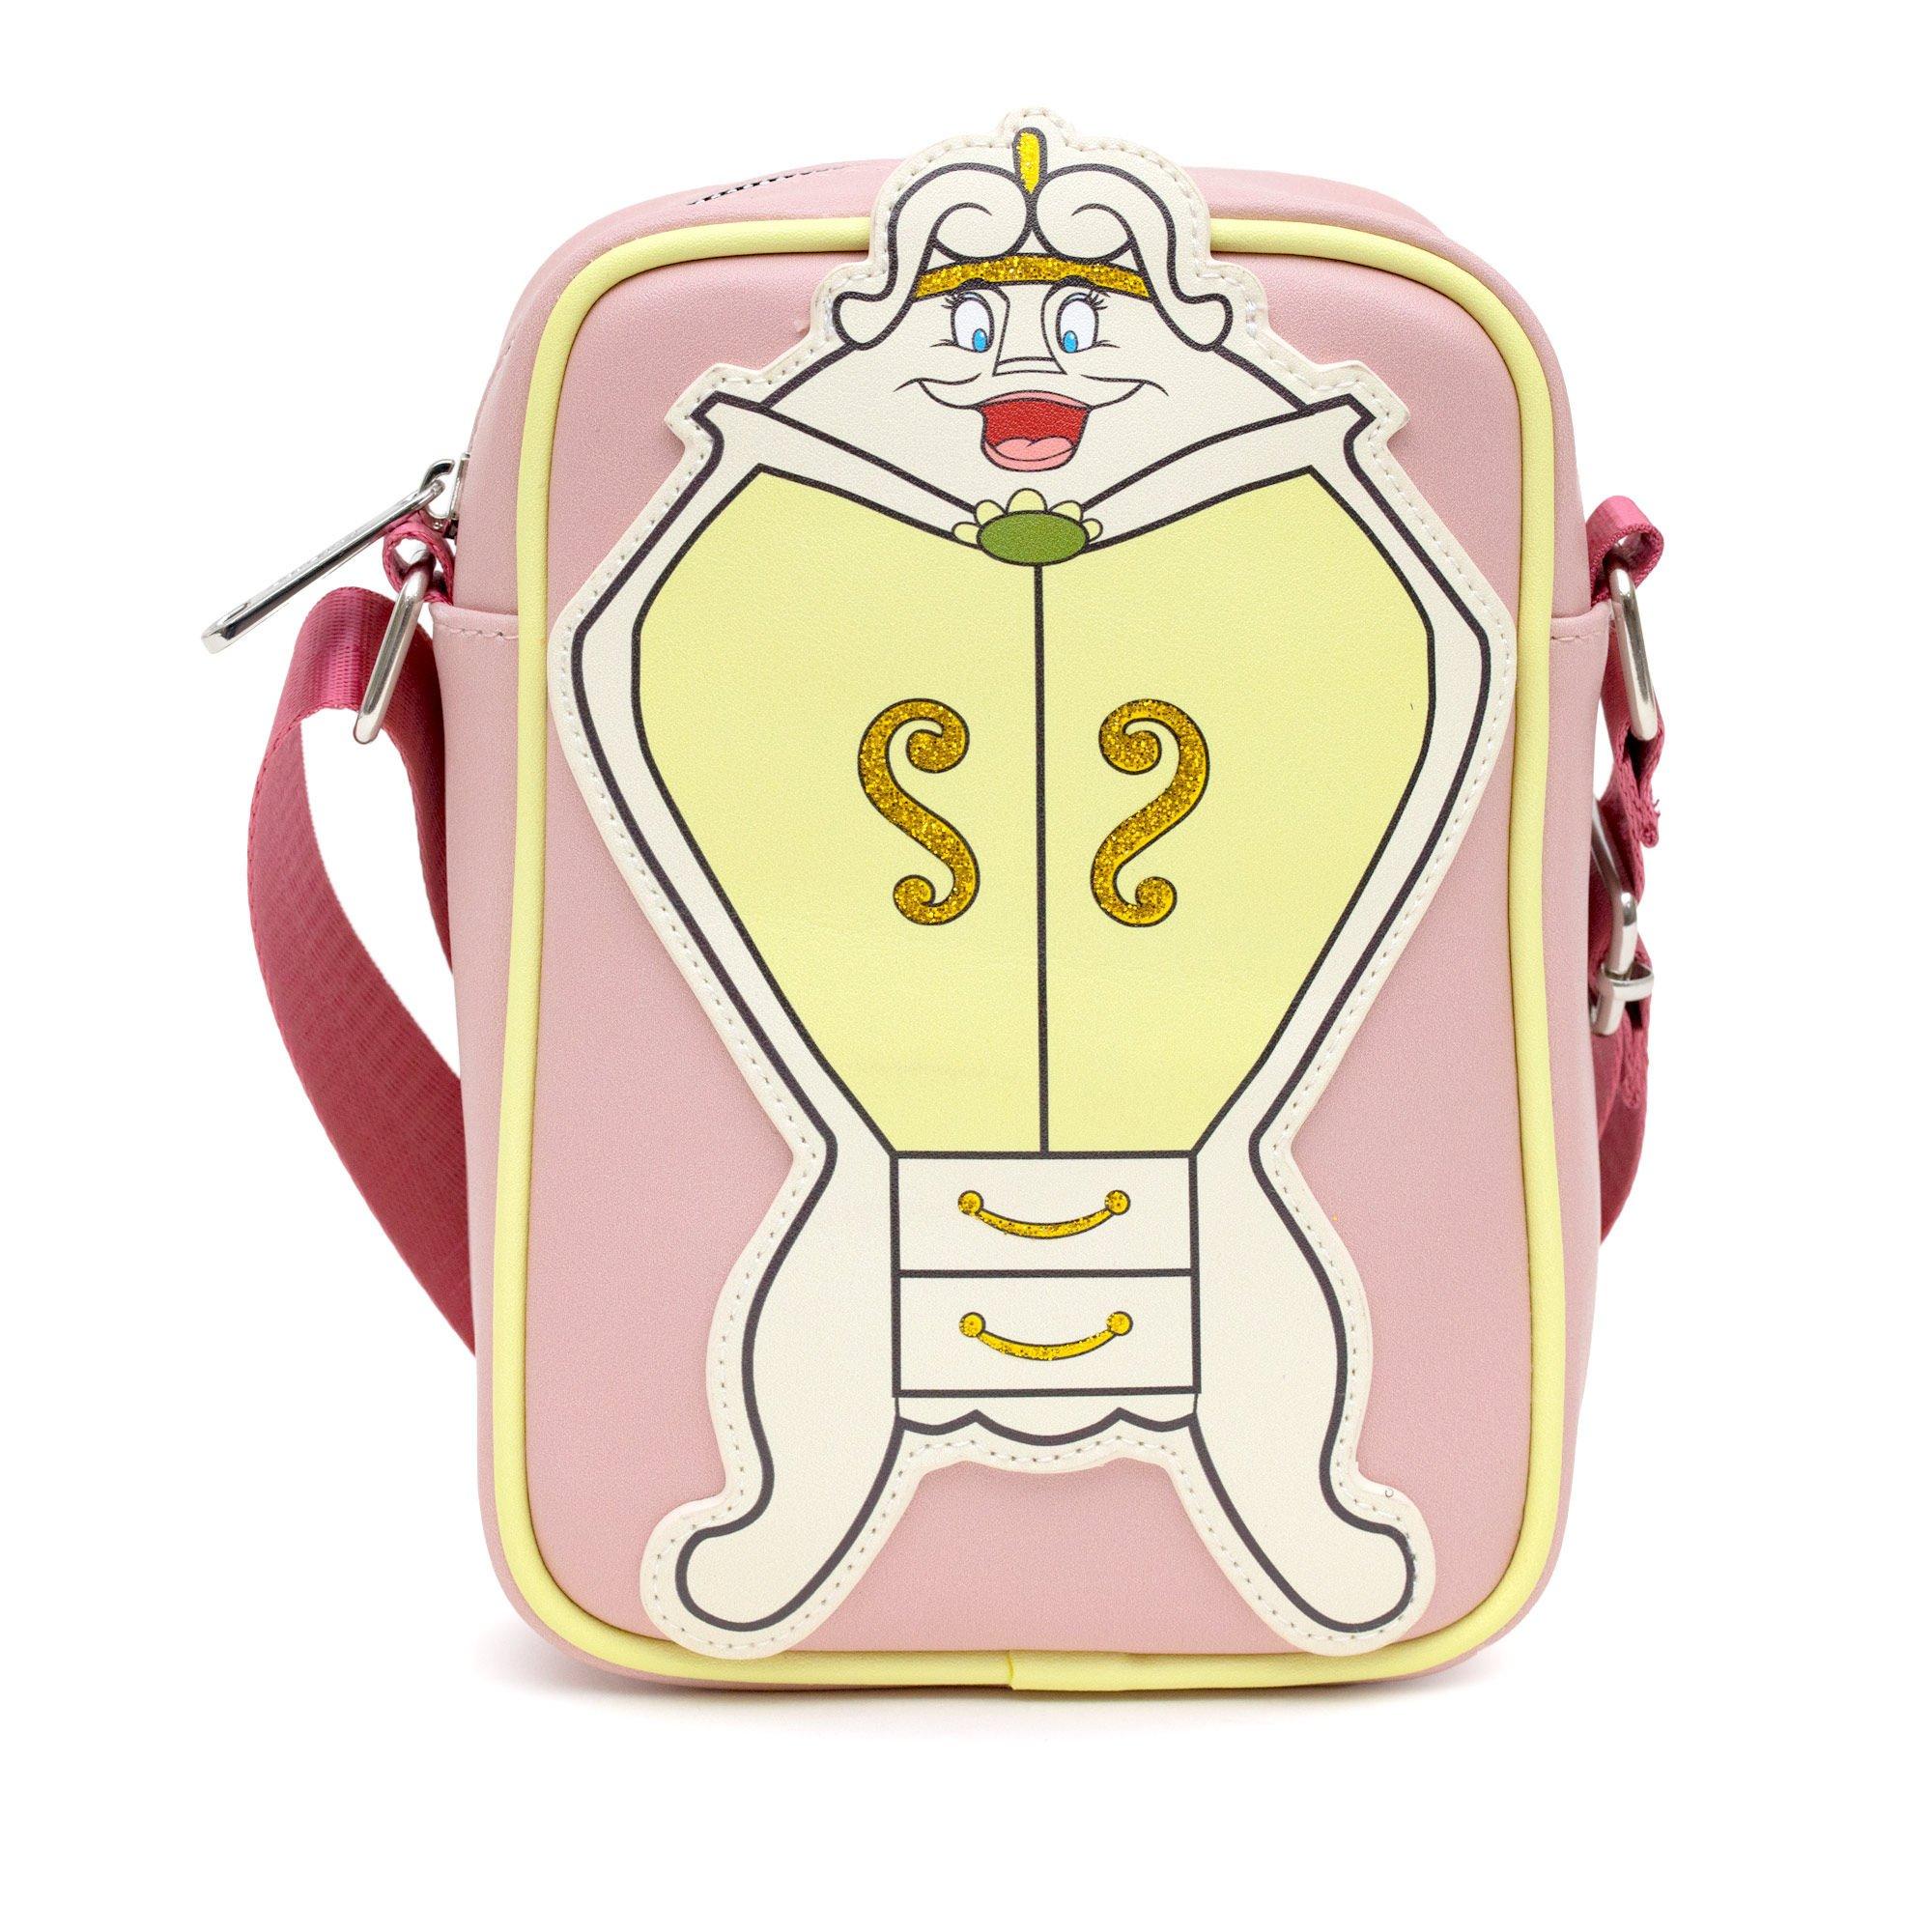 Buckle-Down Disney Beauty and the Beast Polyurethane Crossbody Bag with Piping Edge and Cell Phone Pocket, Size: One Size, Buckle Down